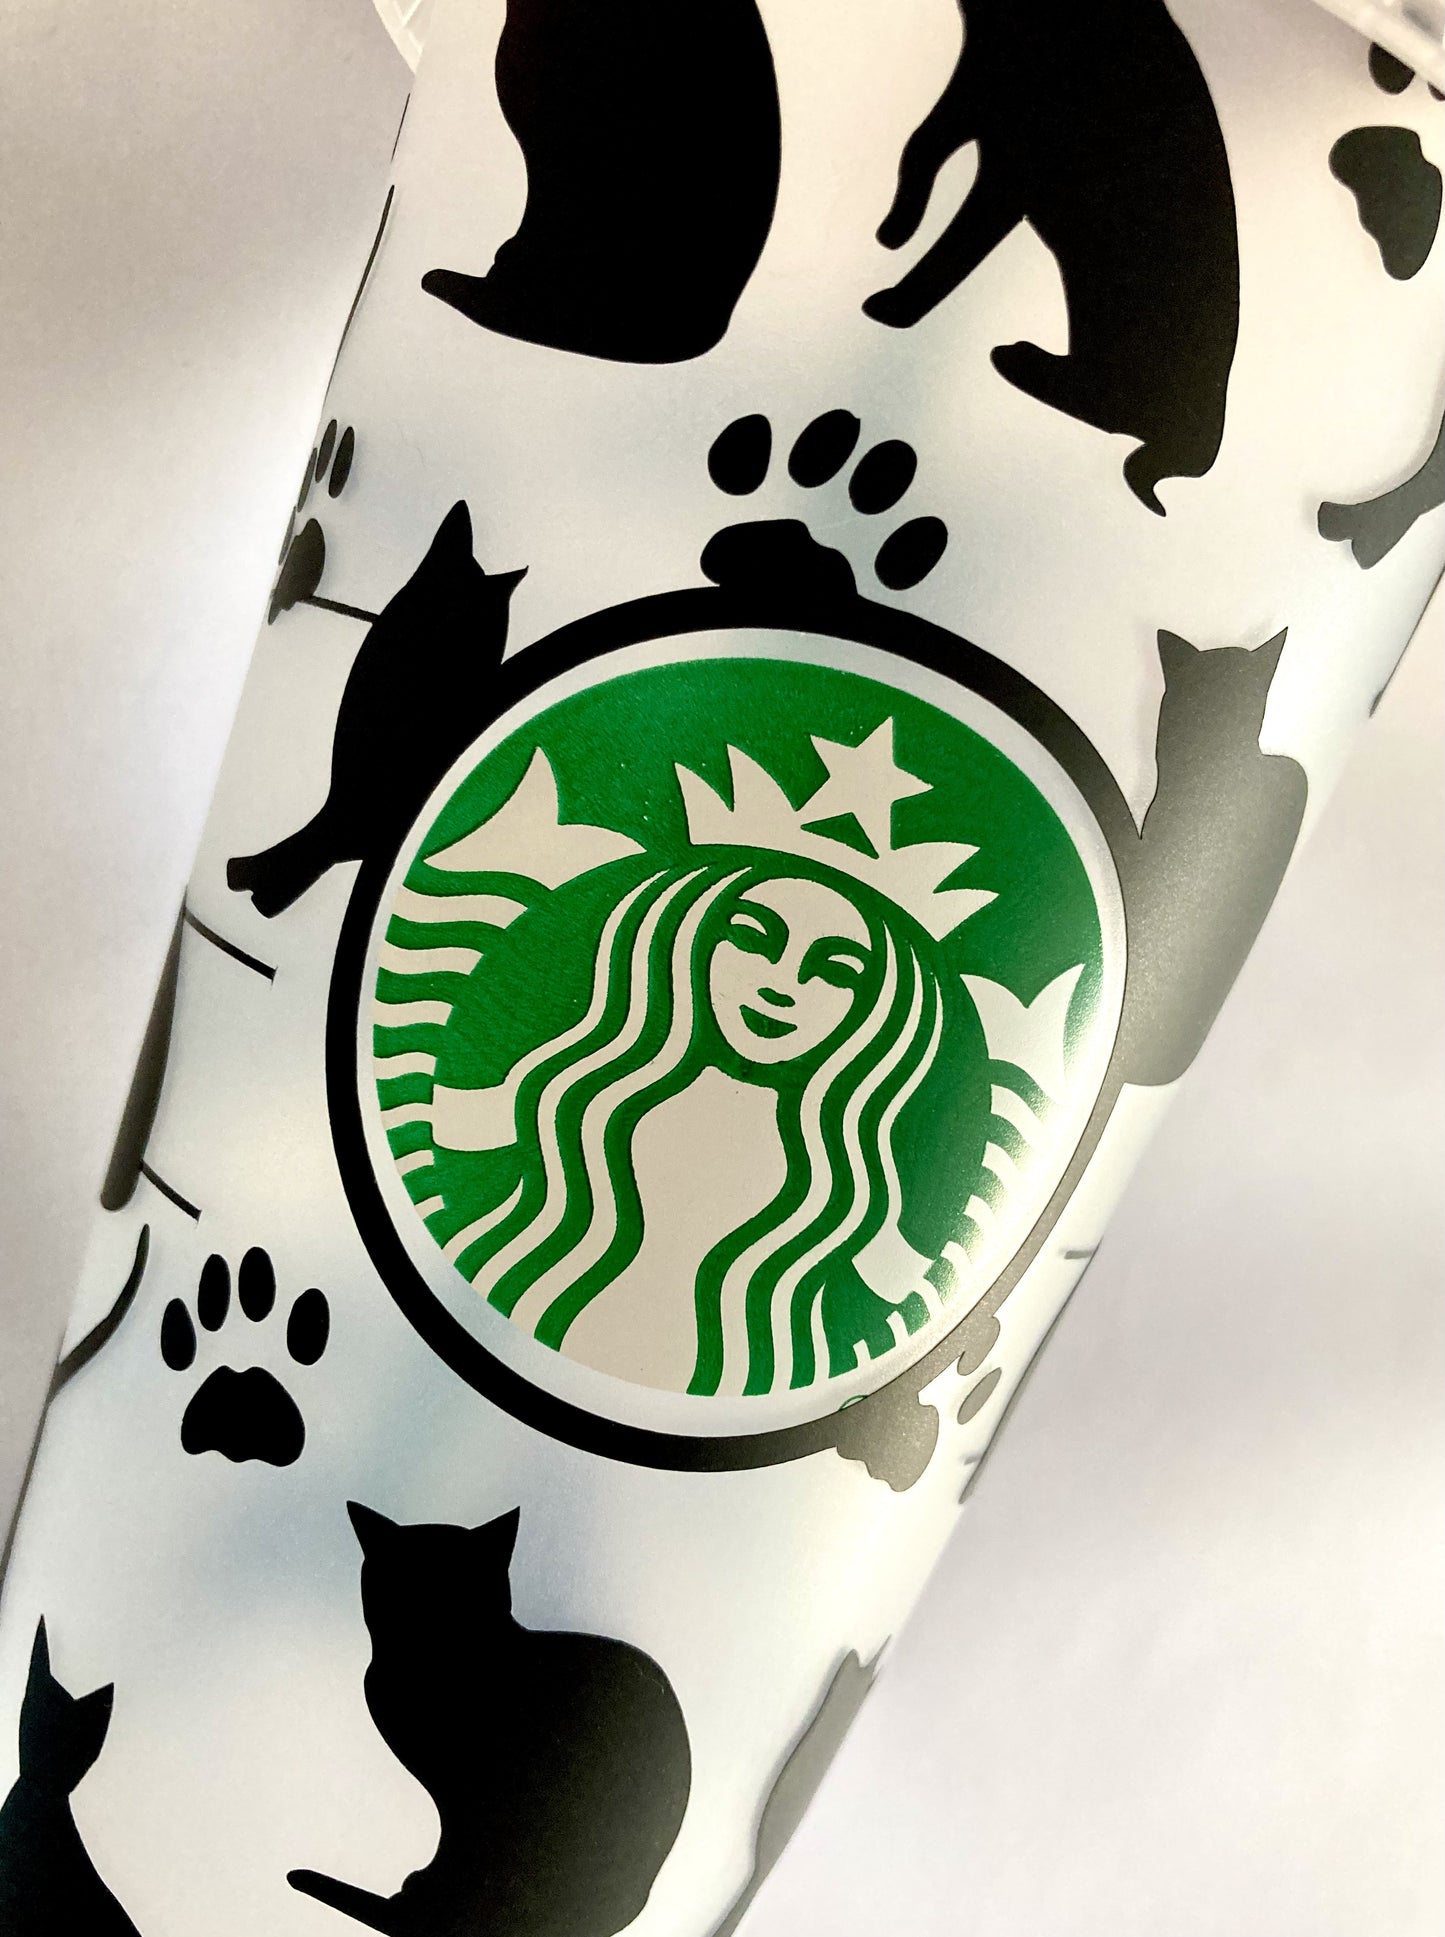 Custom Starbucks inspired reusable cold cup tumbler with straw - black cats & paws